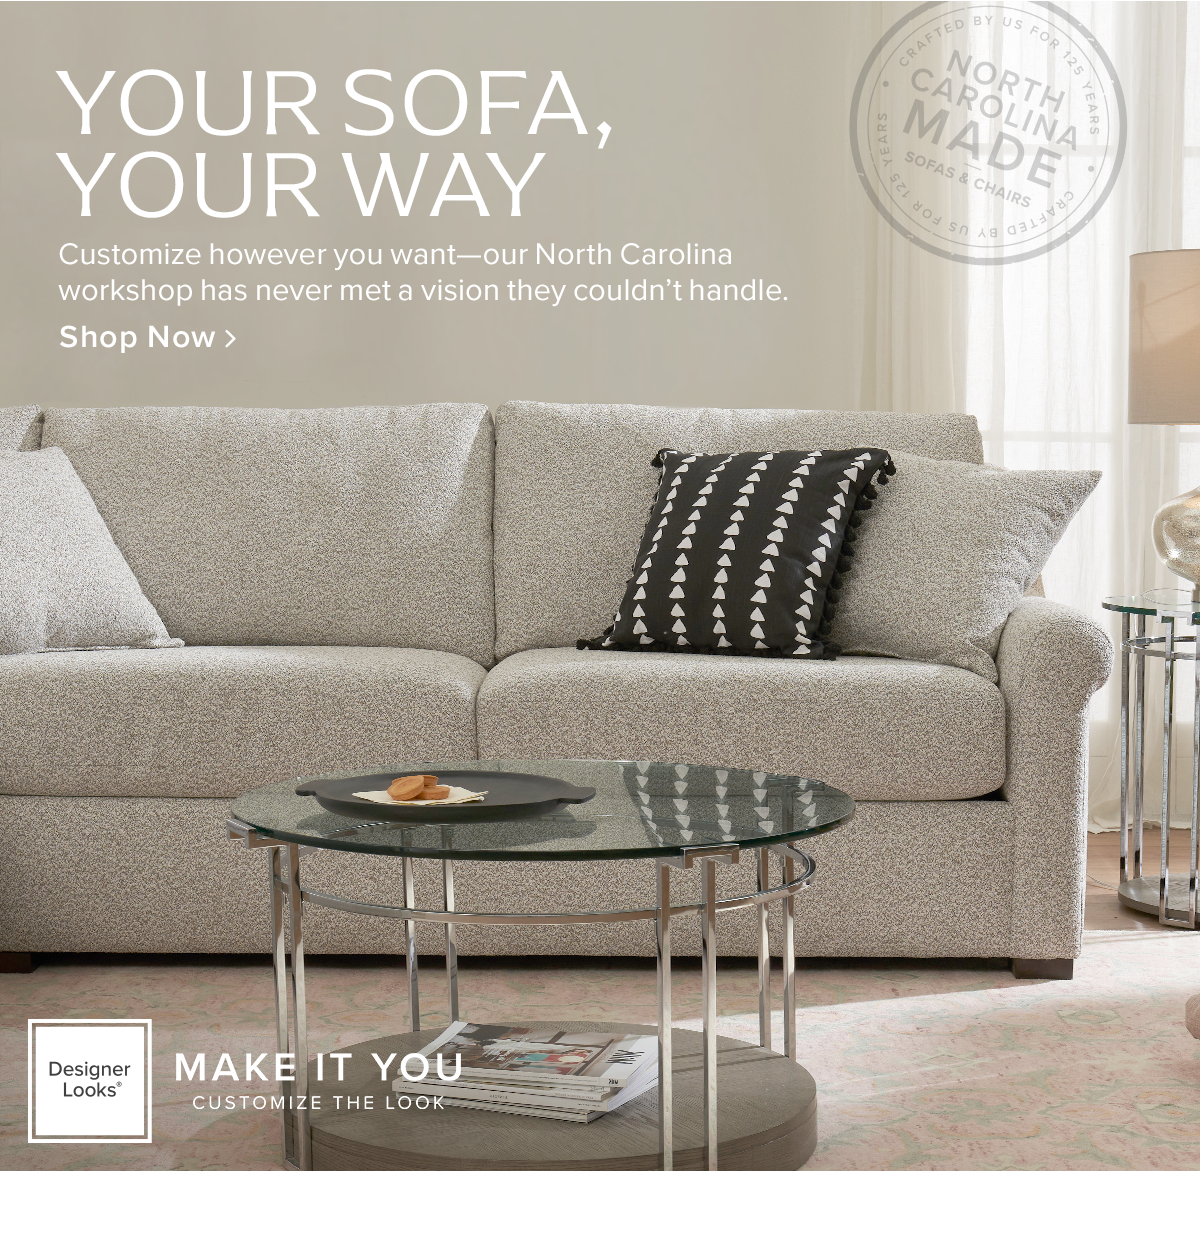 Your Sofa, Your Way